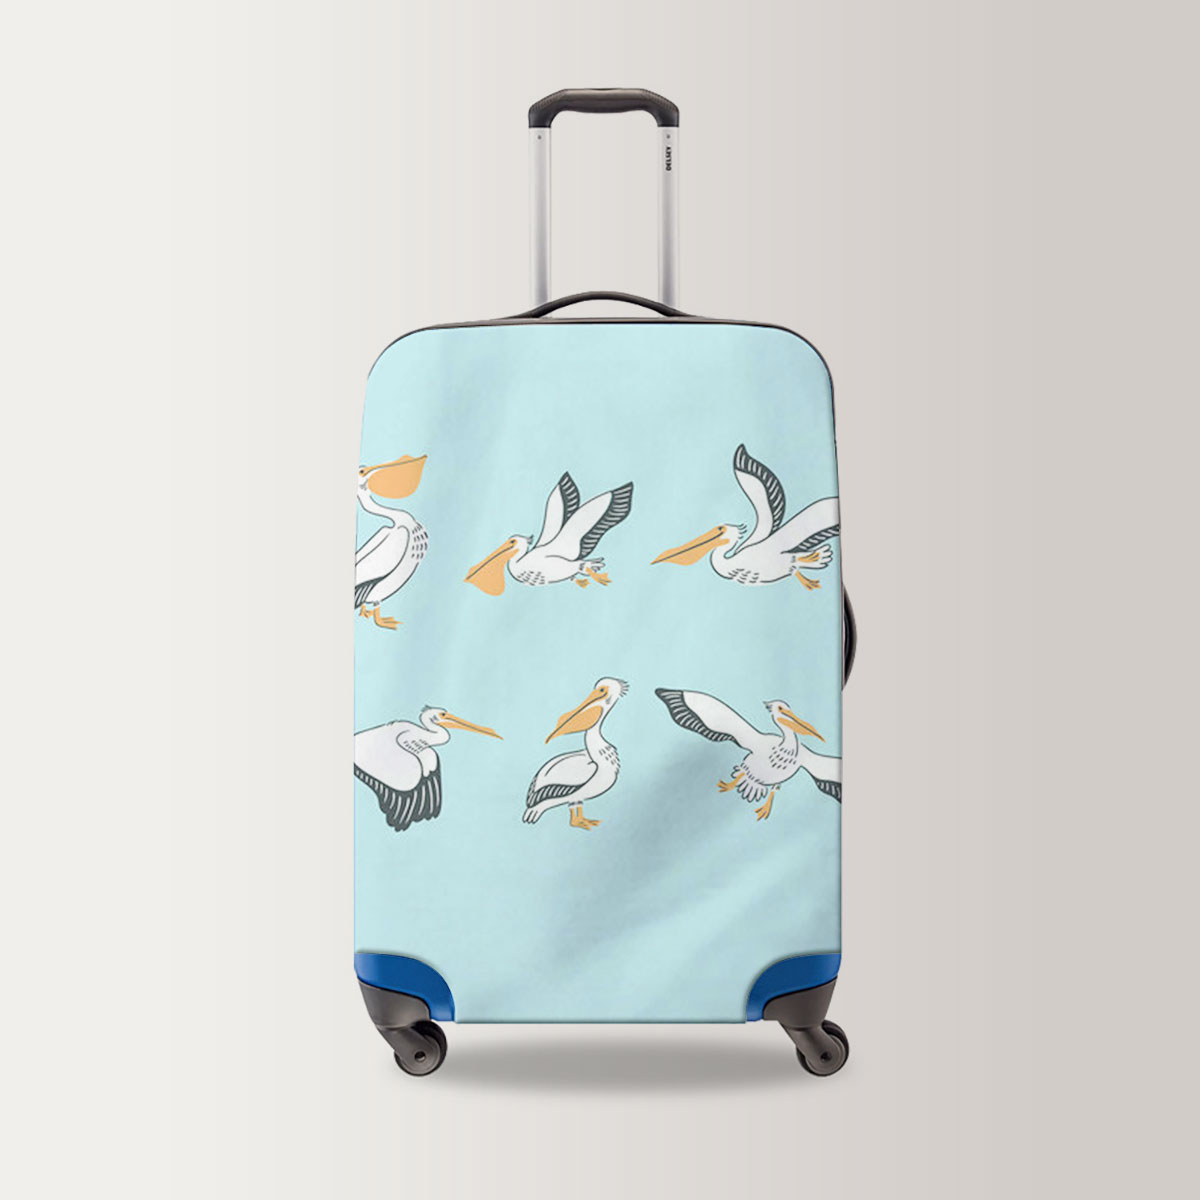 Positions Pelicans Coon Luggage Bag